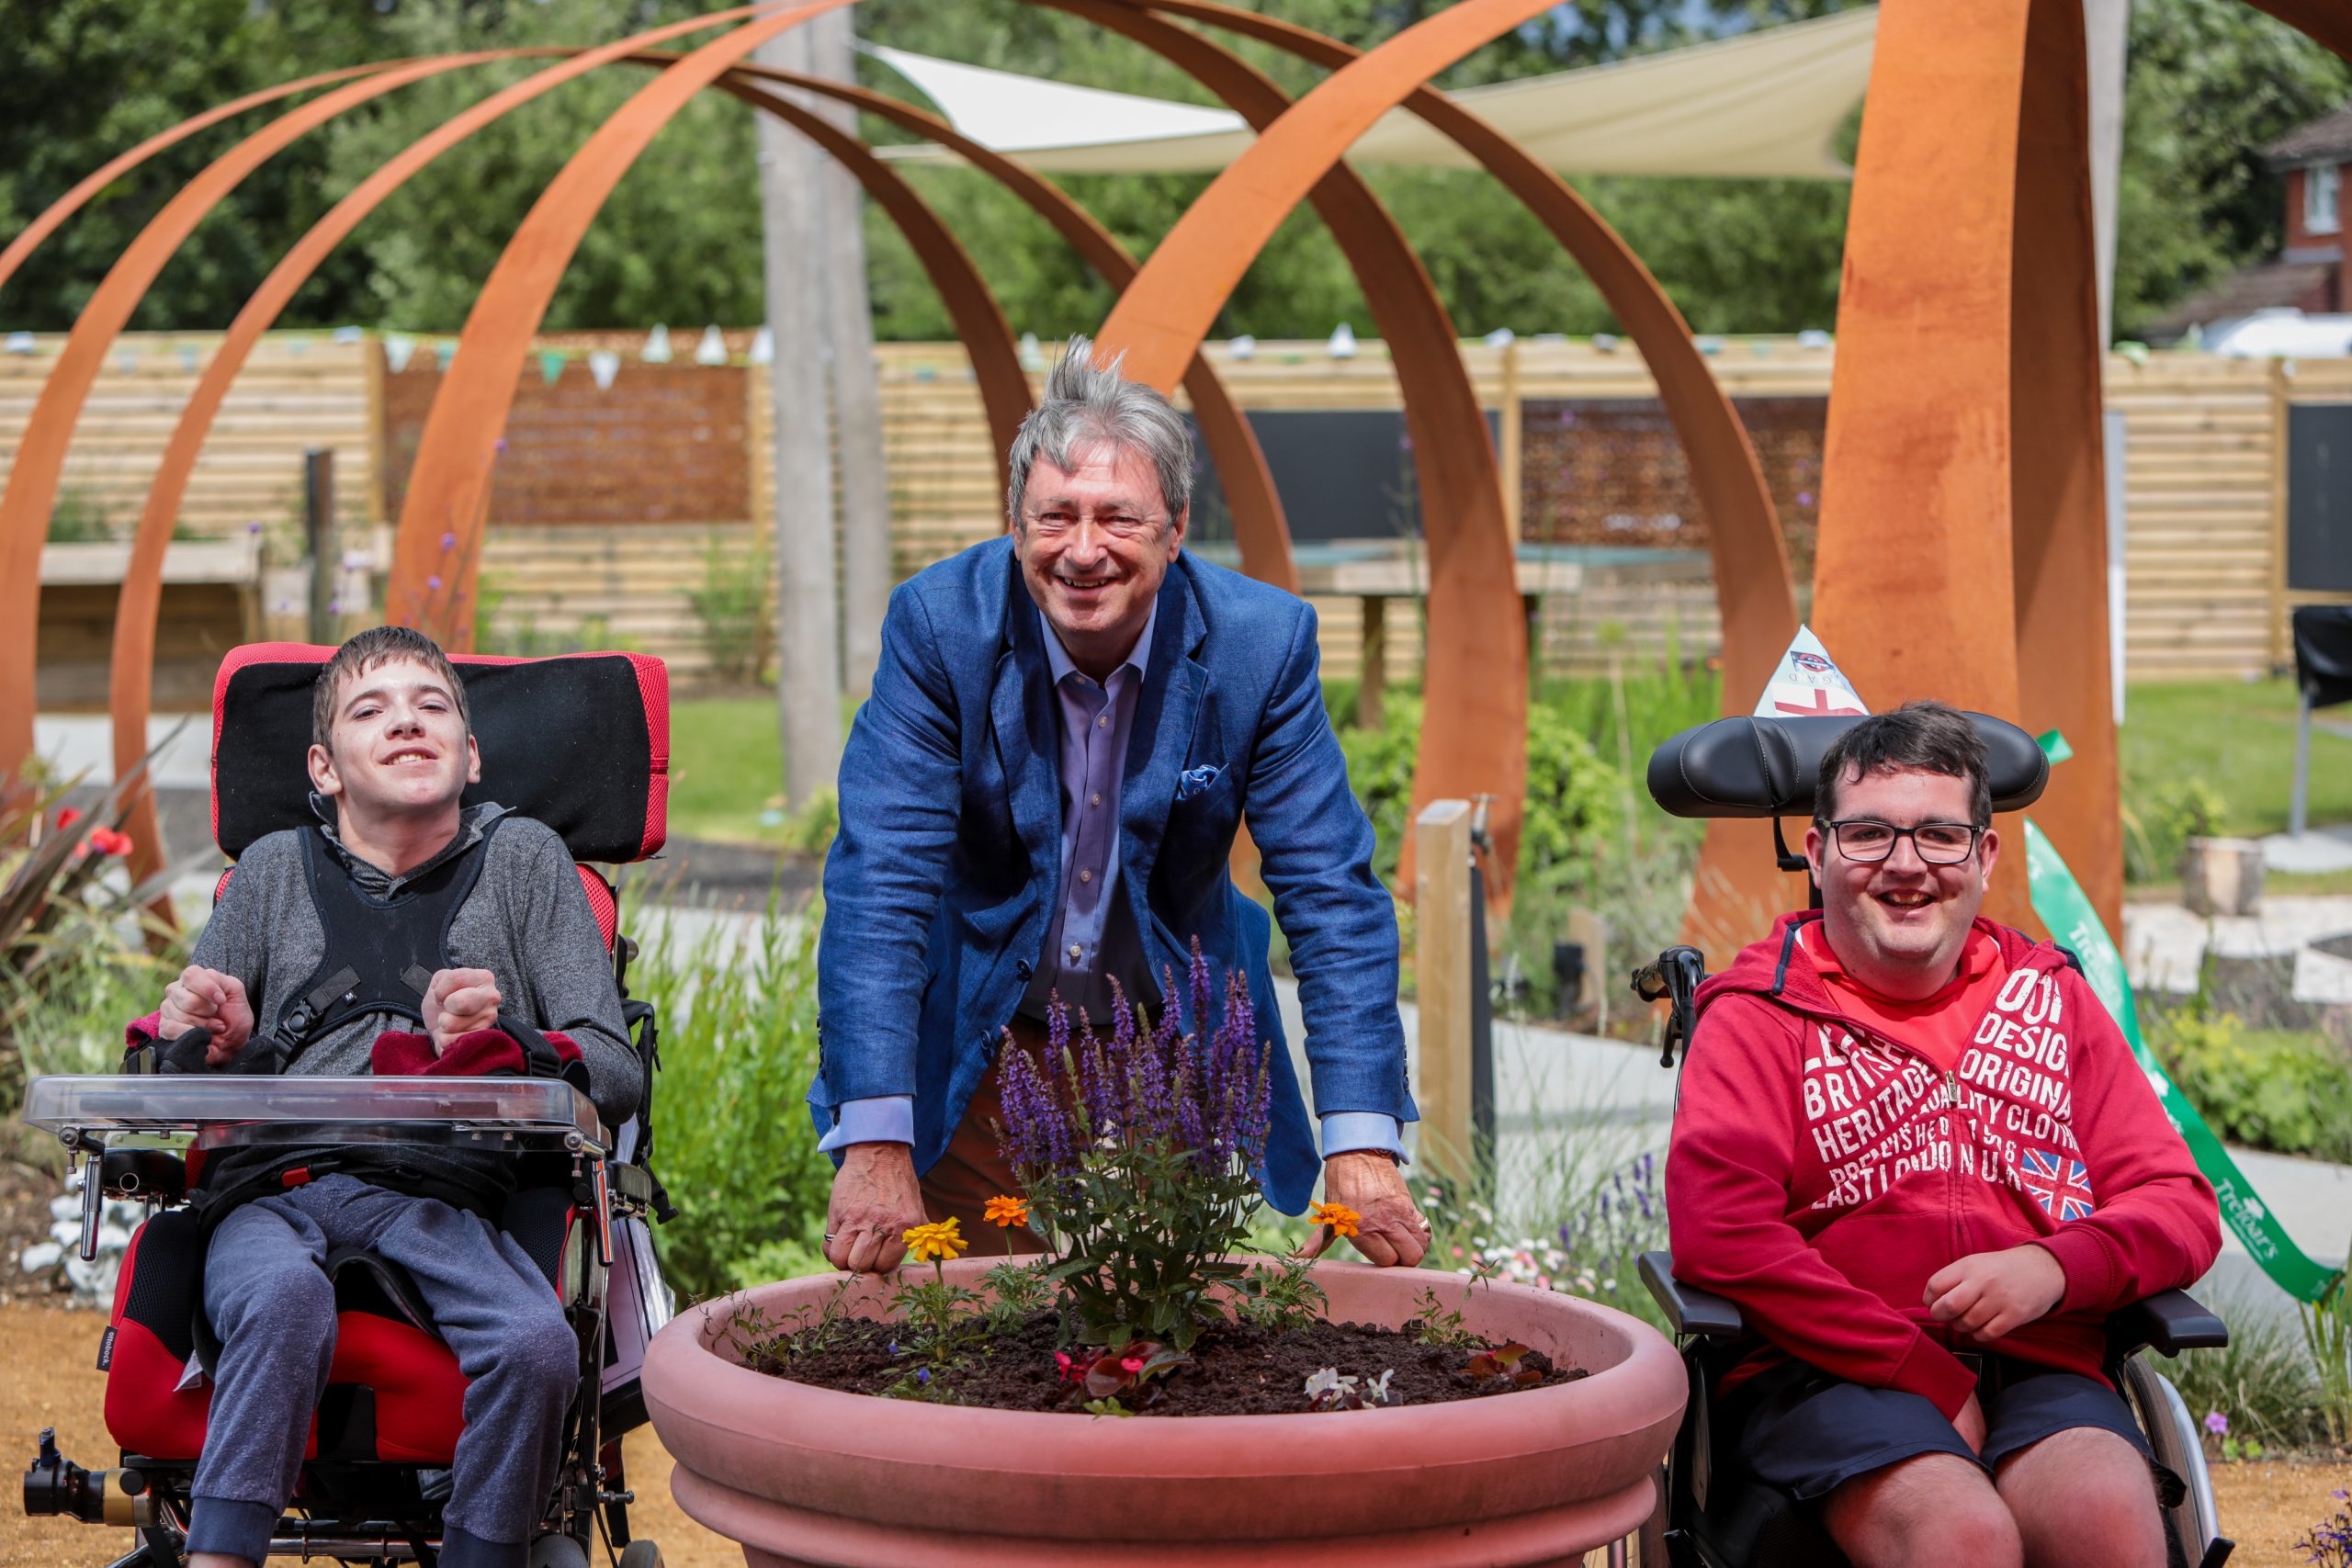 Alan Titchmarsh cuts the ribbon for the new Outdoor Learning Centre with students Harry and Joe © Treloar’s